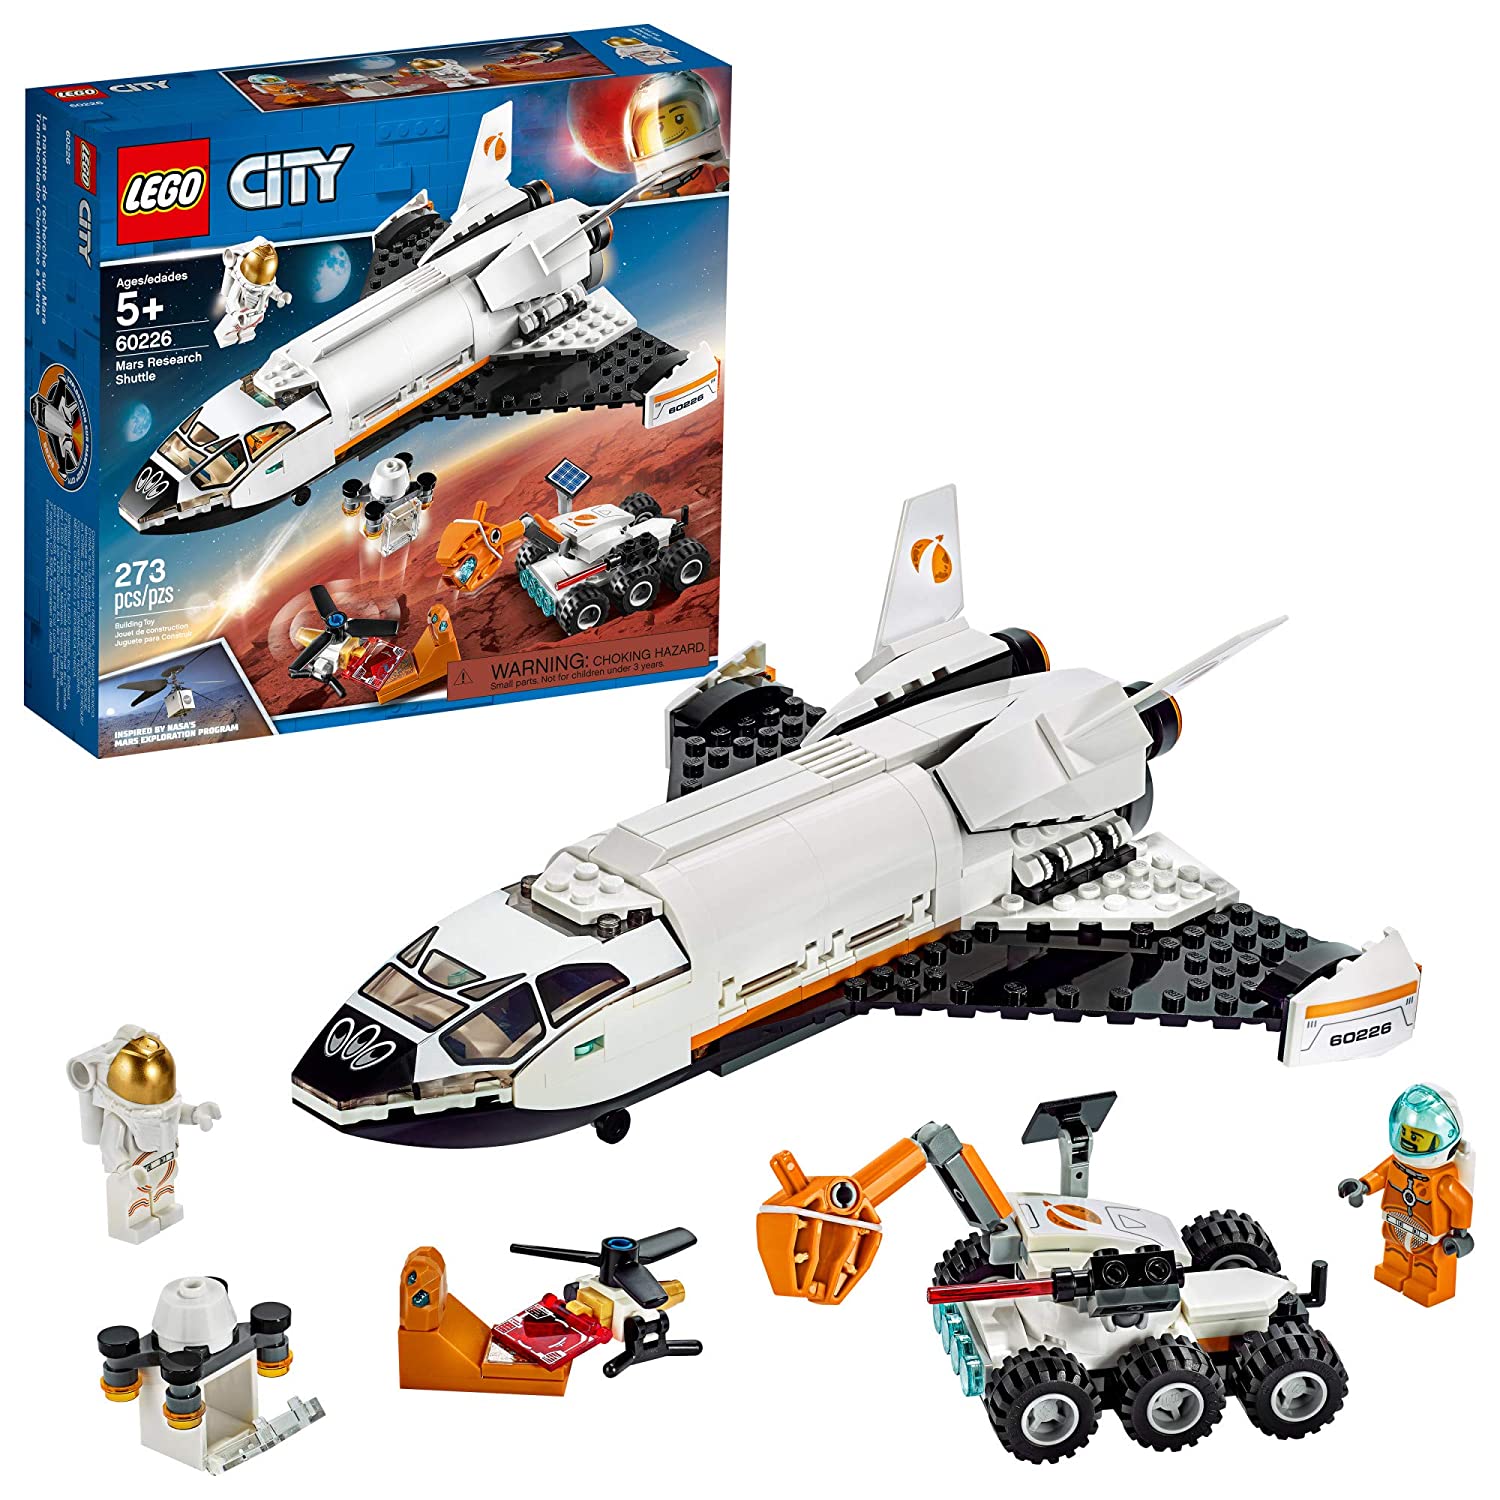 Top 9 Best LEGO Space Shuttle Sets Reviews in 2022 4